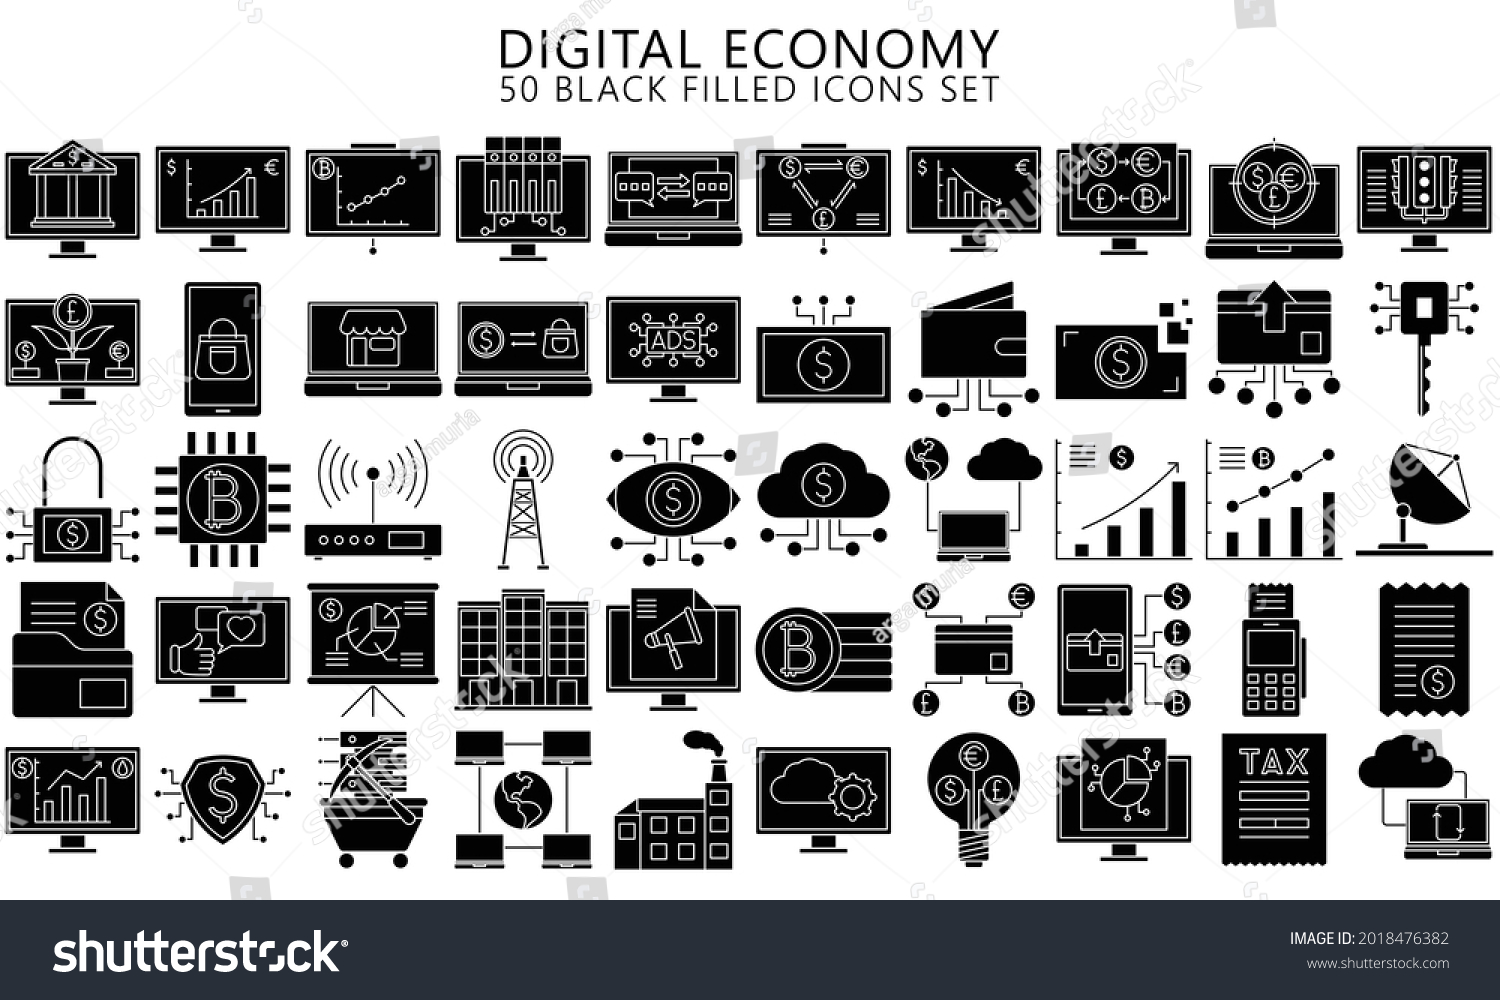 SVG of Digital Economy black filled icons set, contain such as computer, crypto currency, diagram, finance symbol, Used for modern concepts, web, UI or UX kit and applications. ready convert to SVG svg